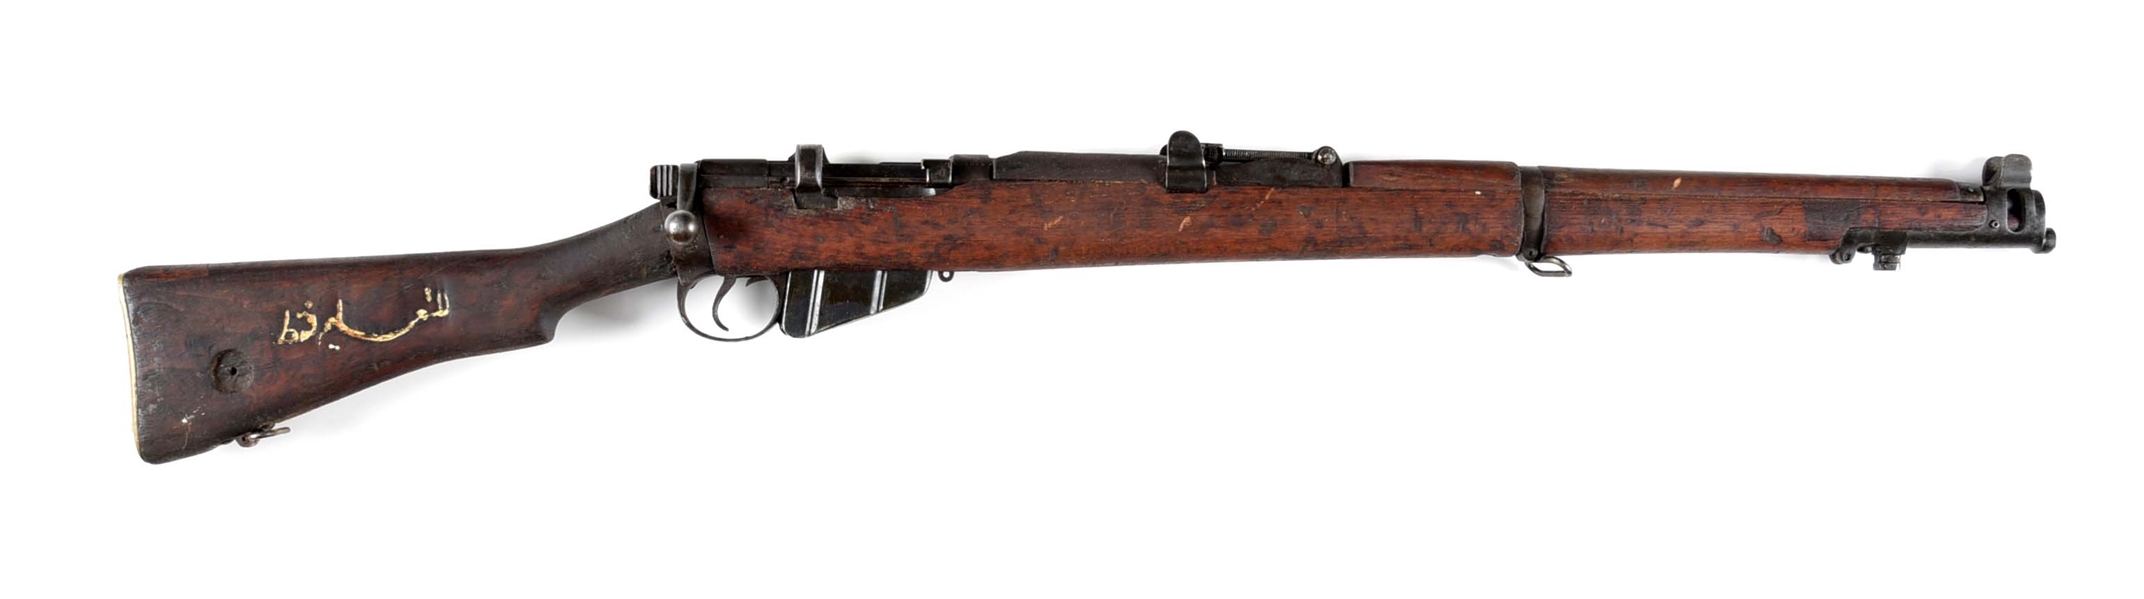 (C) WWI ENFIELD SMLE MK III DRILL PURPOSE BOLT ACTION RIFLE.